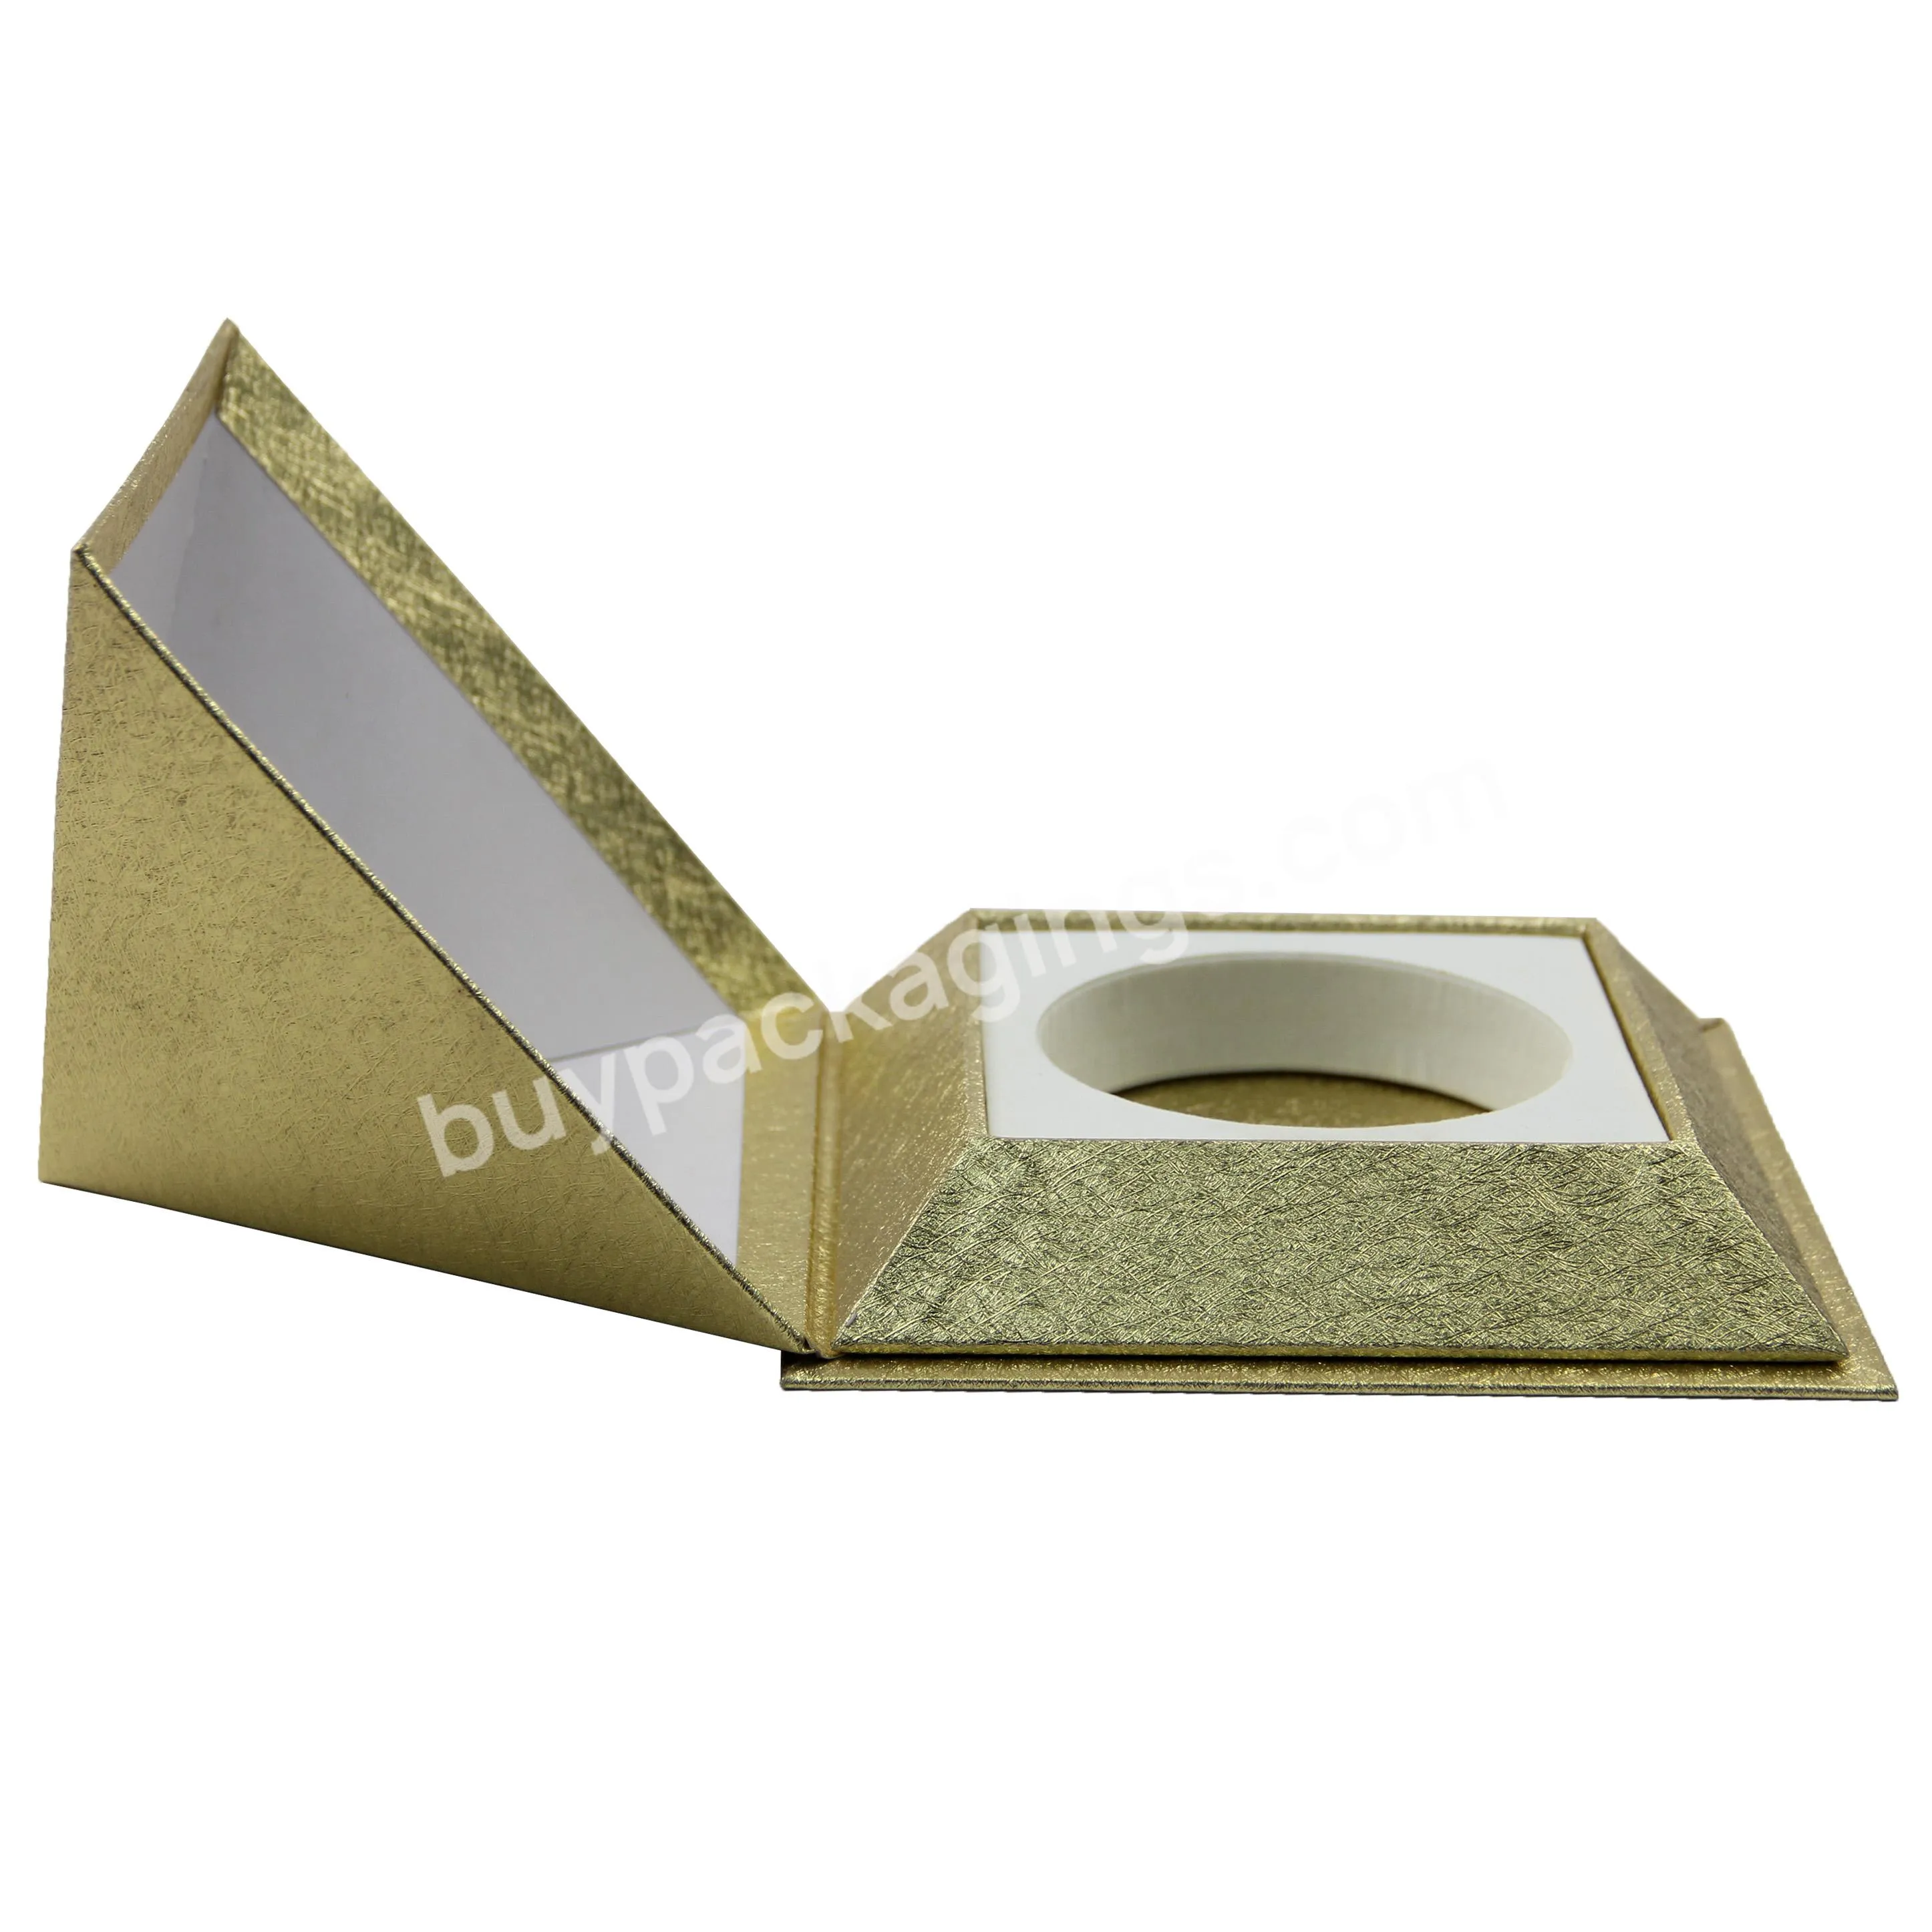 3D Solid triangle creative design custom box packaging